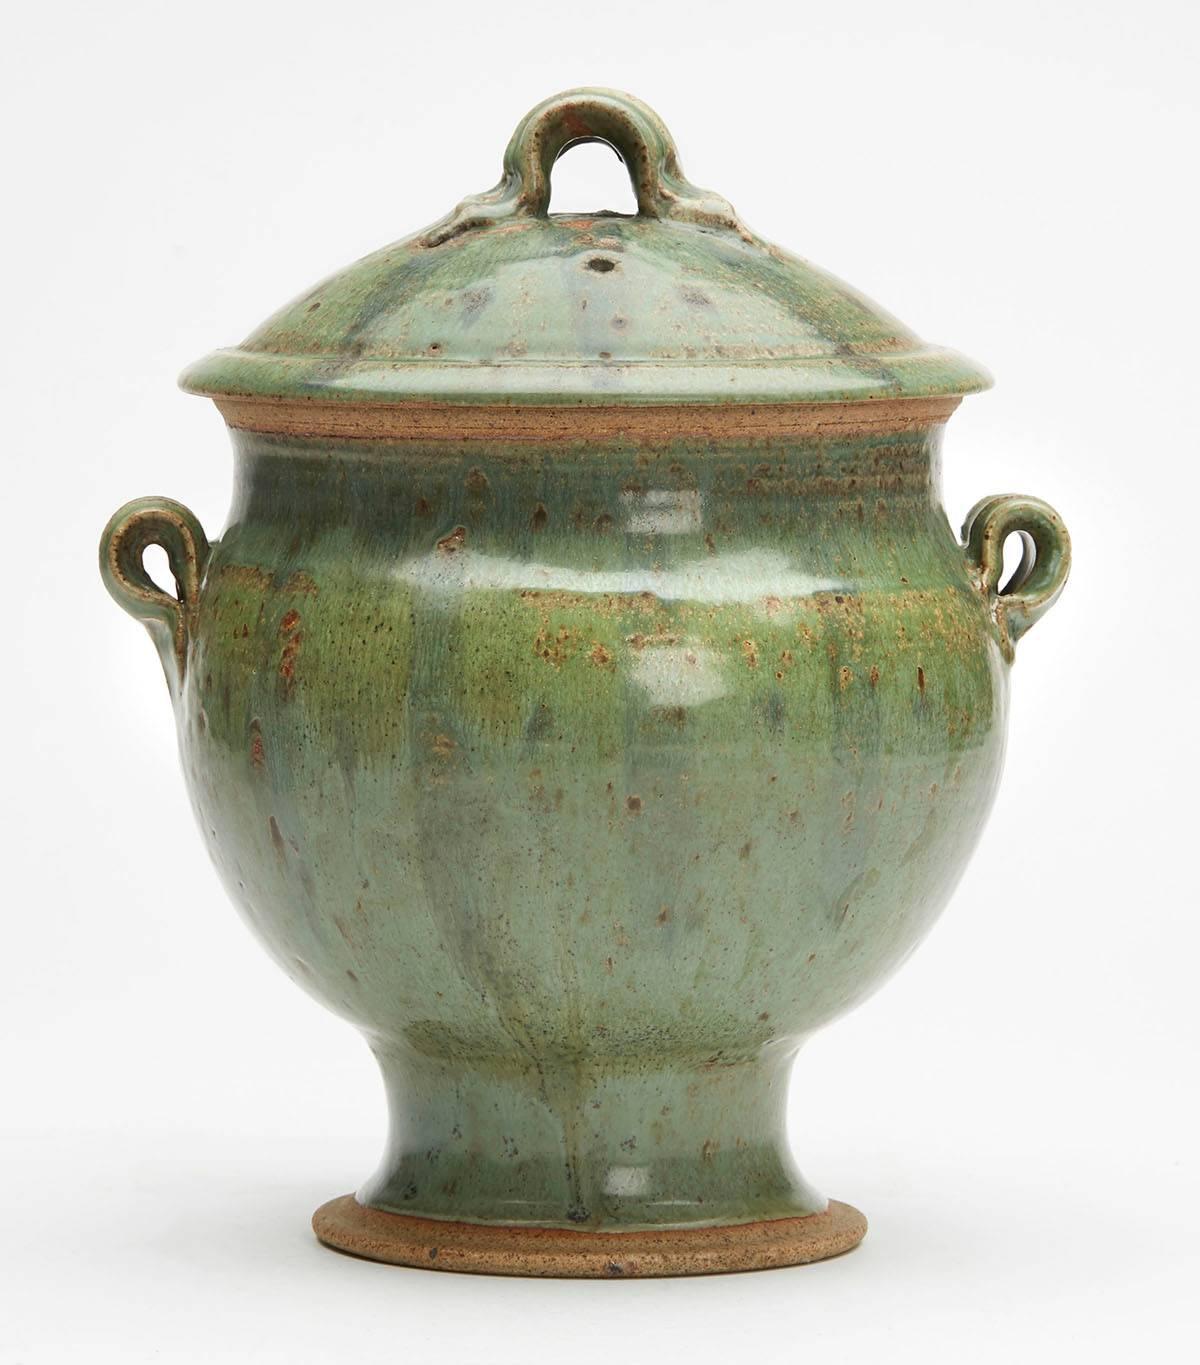 A vintage Studio Pottery twin handled lidded stoneware urn decorated in mottled green glazes. The urn stands on a rounded pedestal foot with an unglazed rim with a rounded bulbous body with small looped ridged handles and with a hat shaped cover